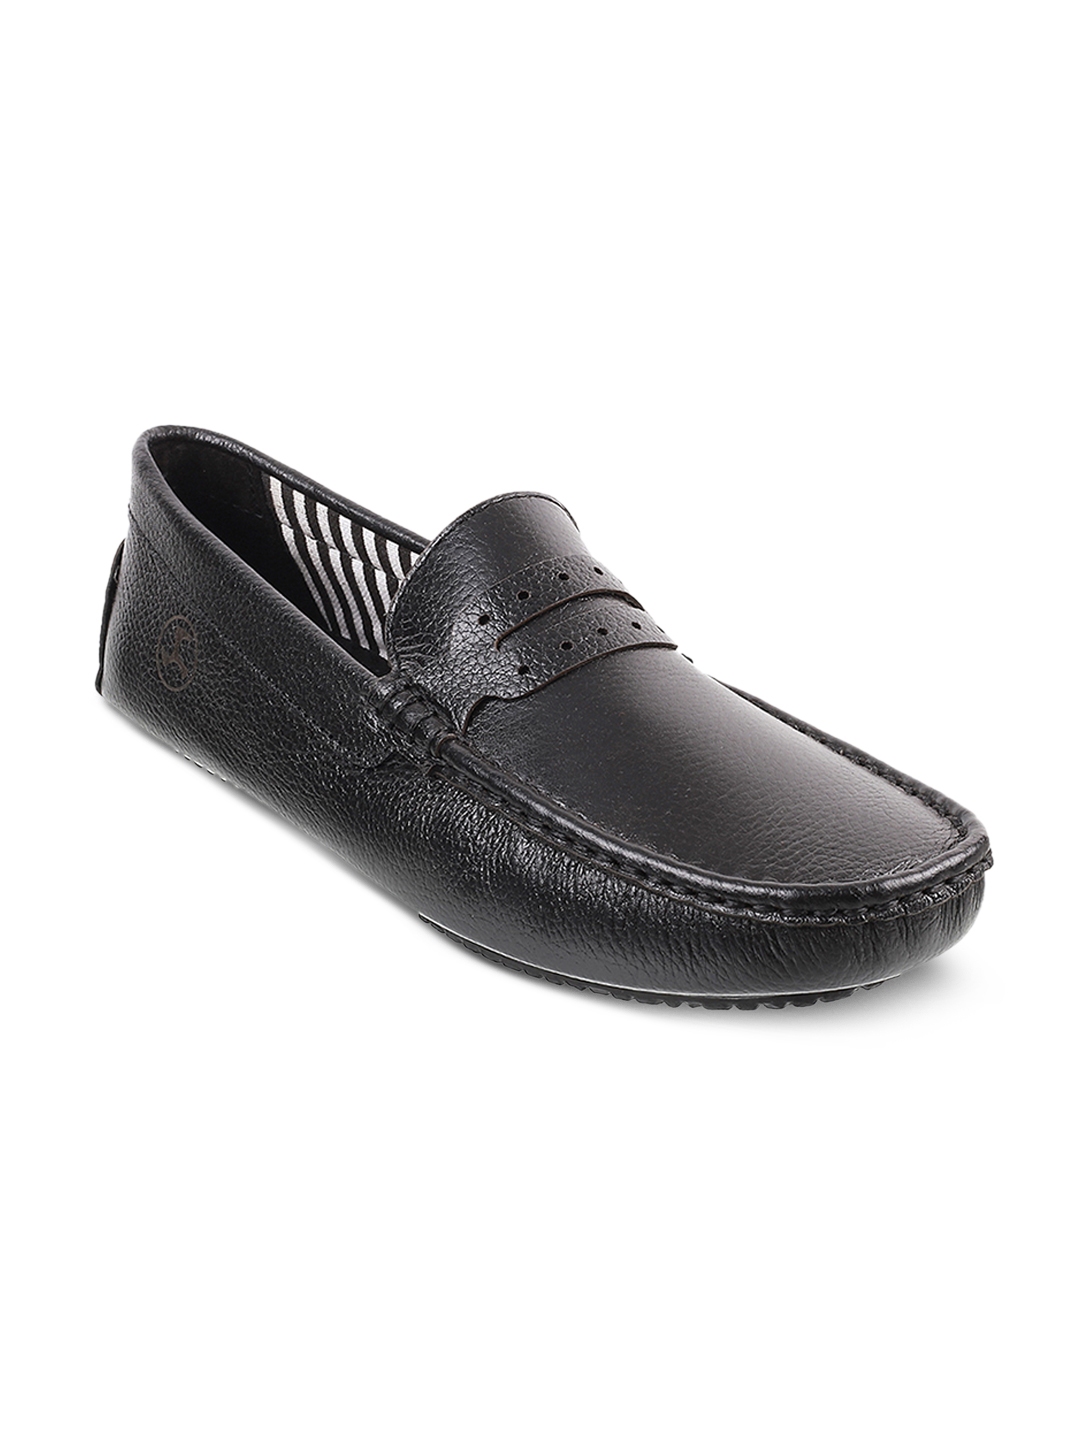 Buy Mochi Boys Black Textured Loafers - Casual Shoes for Boys 8500755 ...